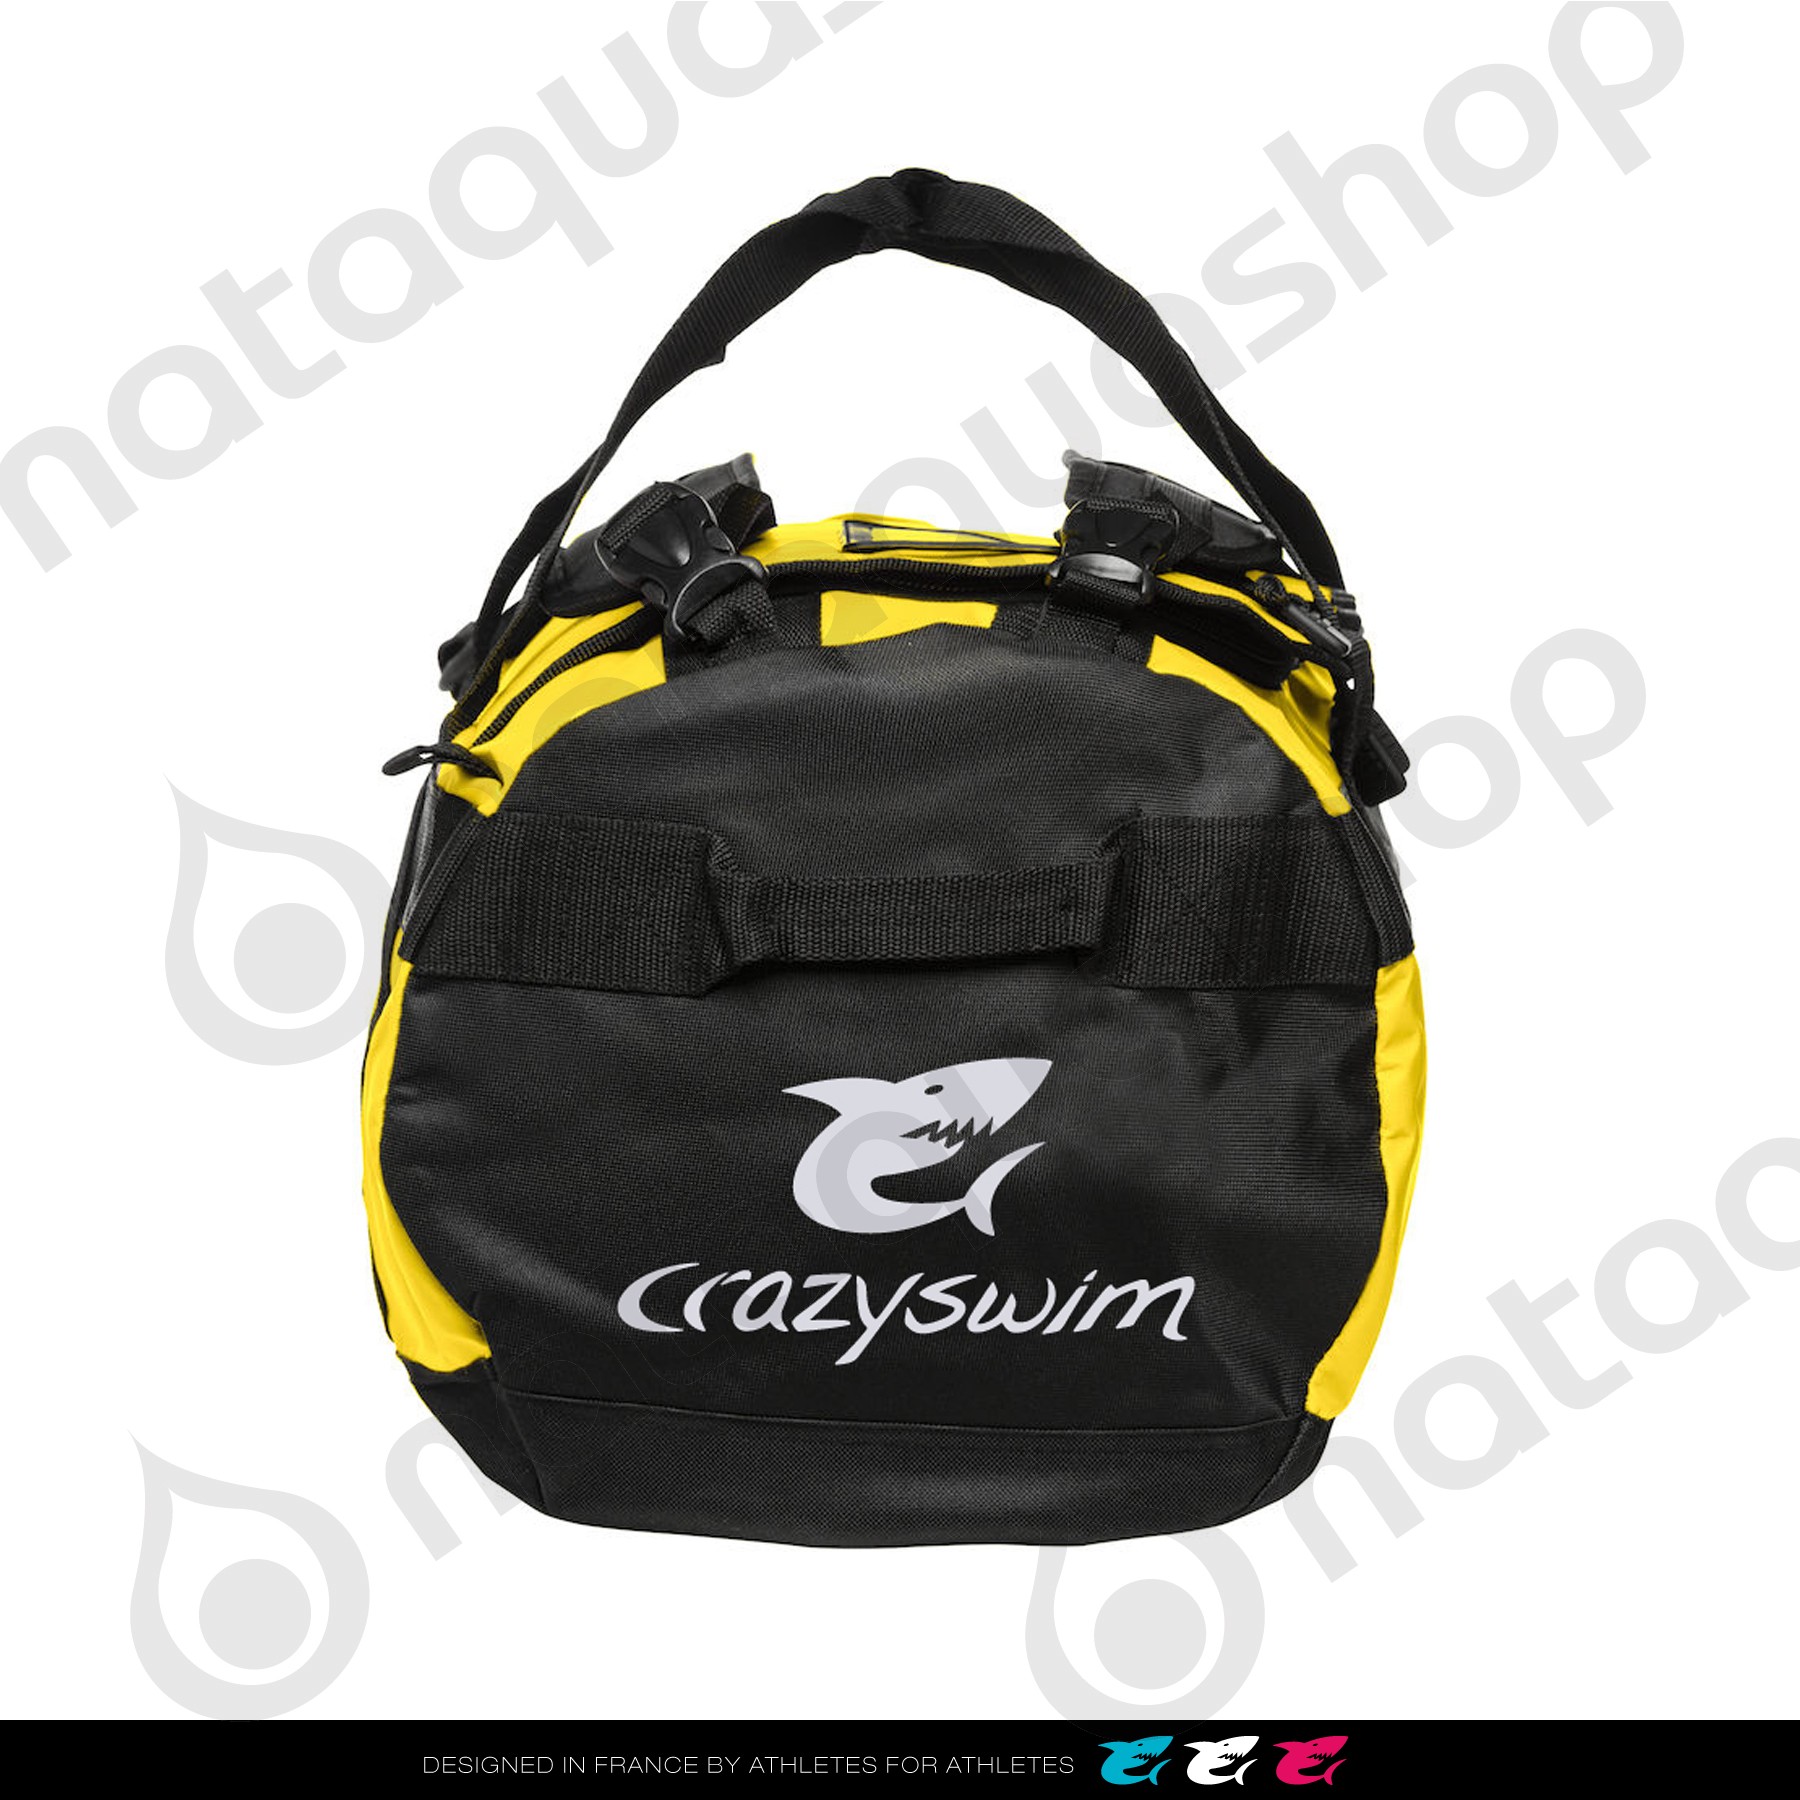 Deluxe Holdall Small Bag - 25litres